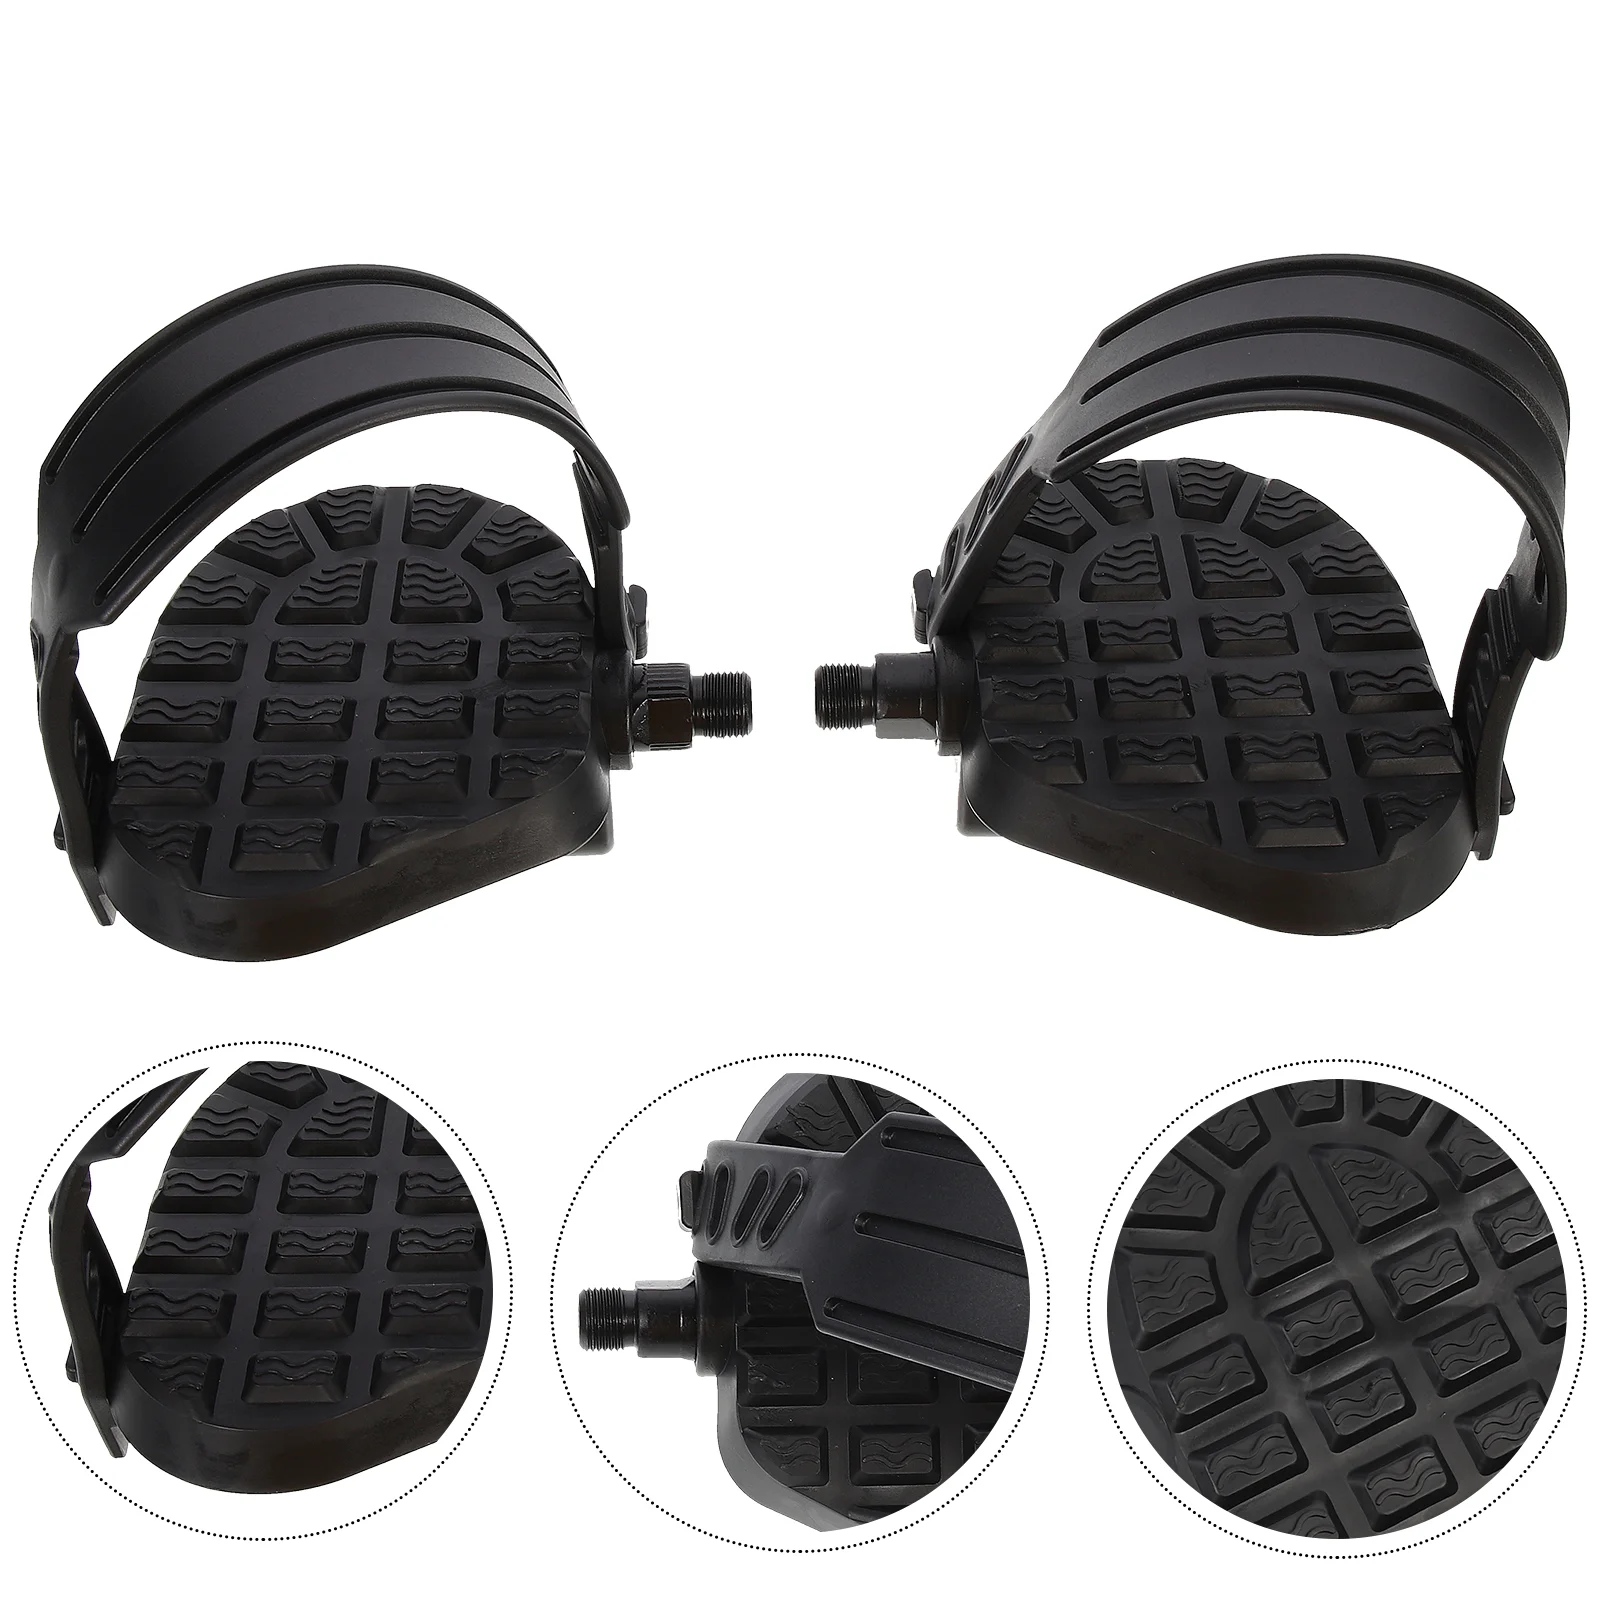 

1 Pair of Fitness Bike Feet Boards Indoor Cycling Bike Pedals Anti-slip Pedals for Fitness Bike